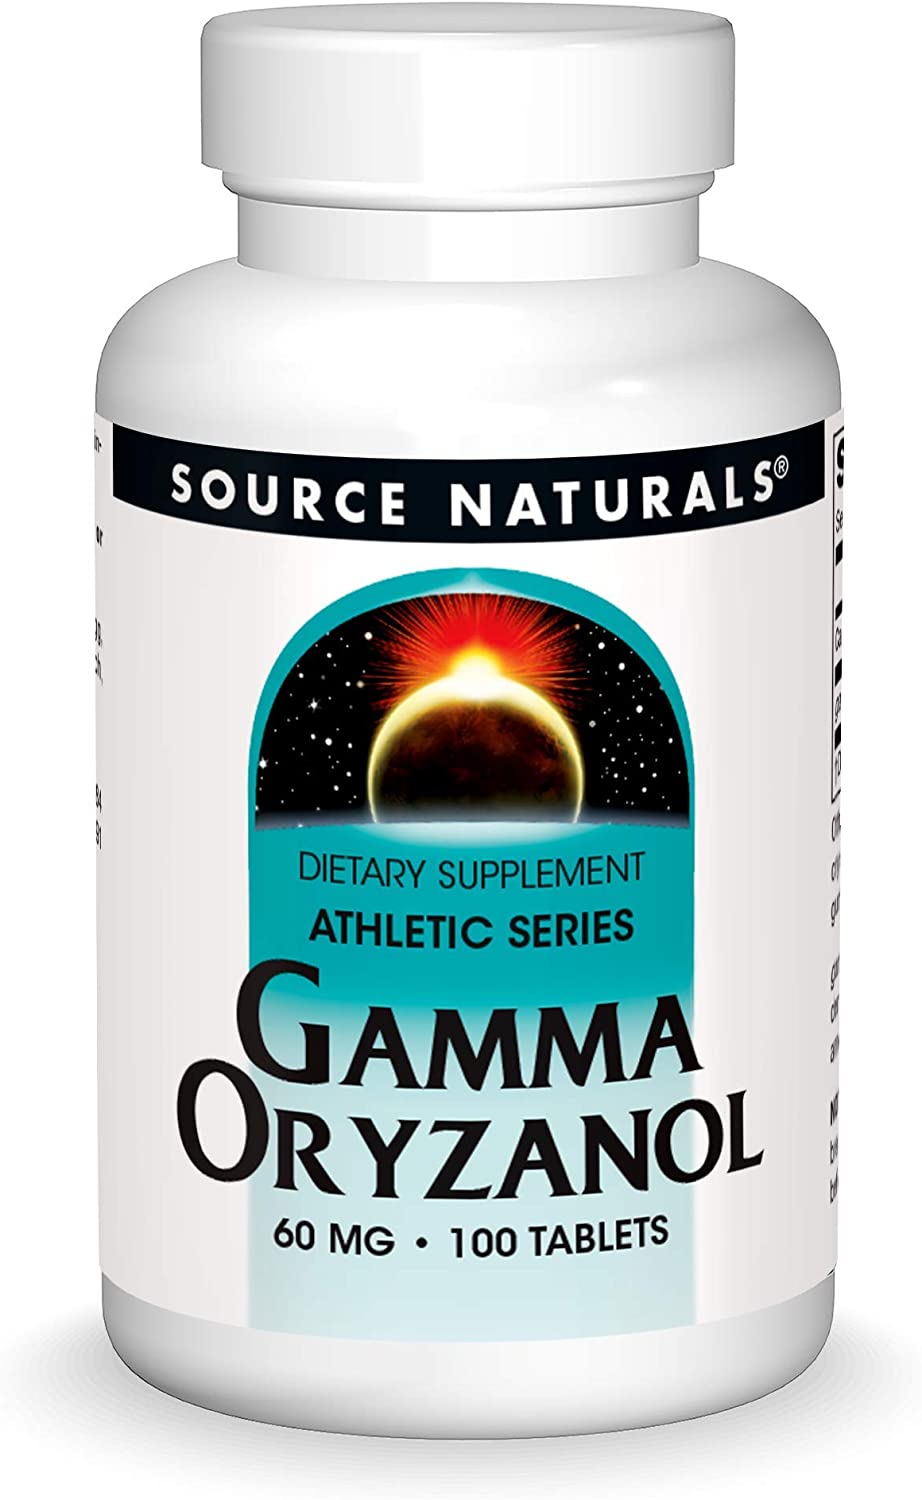 Gamma Oryzanol 60 mg Athletic Series Dietary Supplement by Source Naturals - 100 Tablets